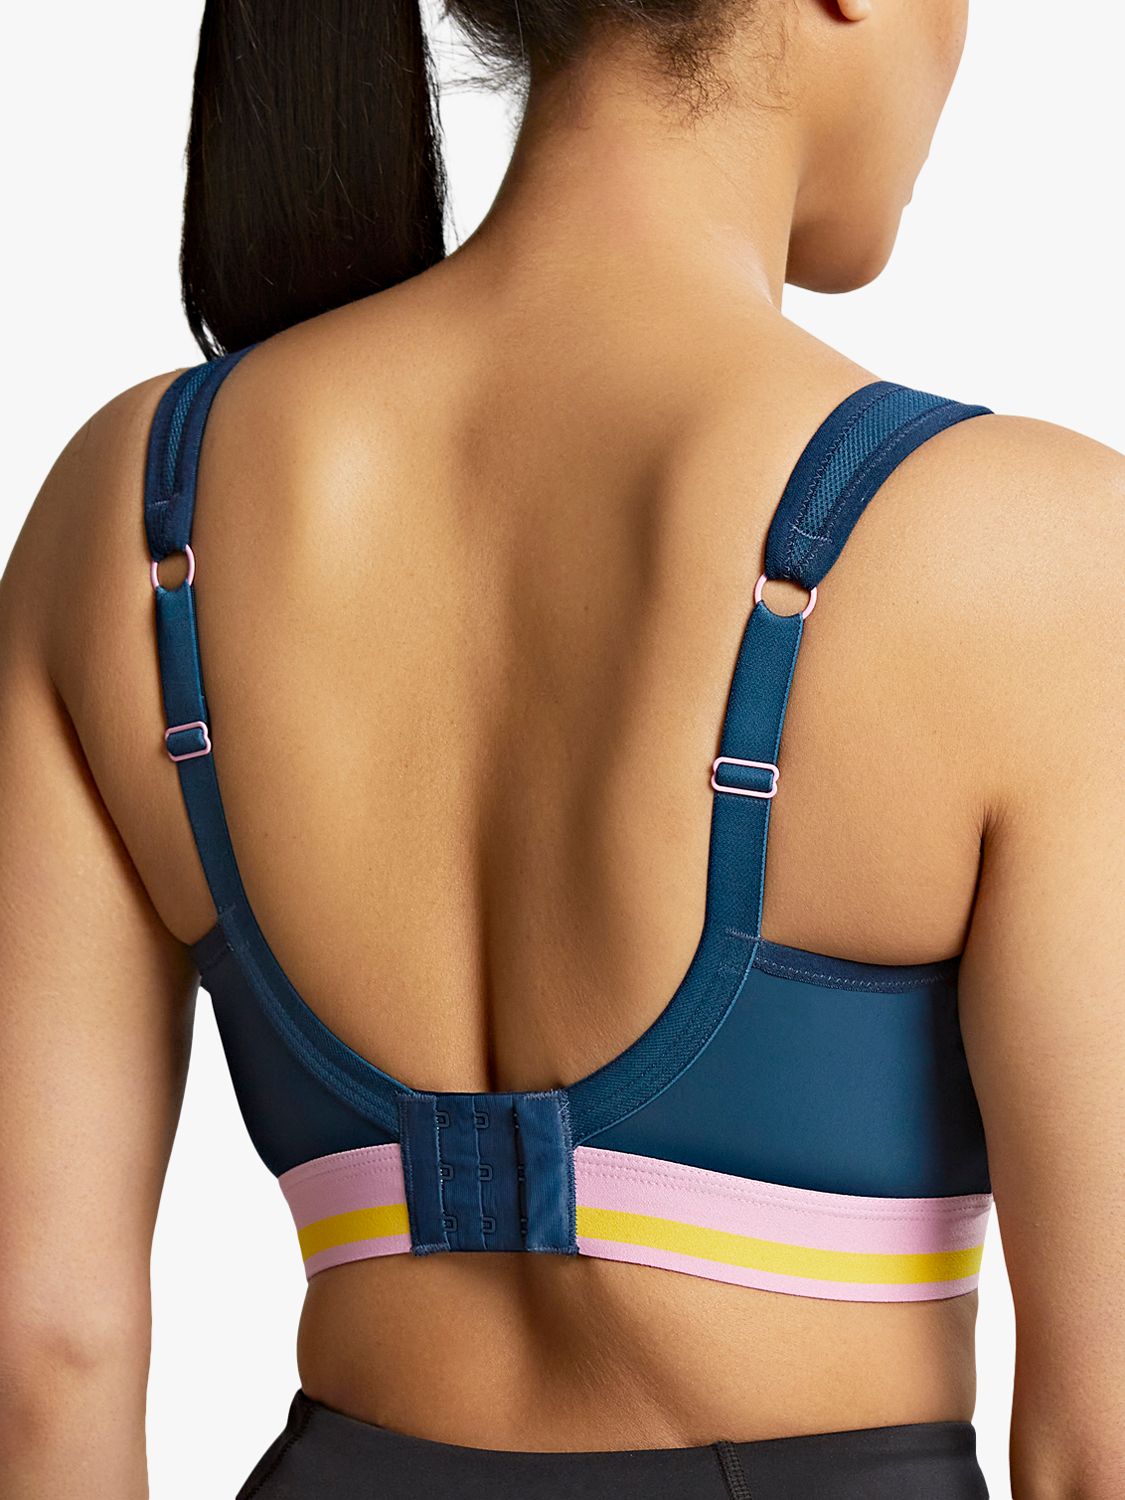 Panache Non Wired Sports Bra, Charcoal Marl at John Lewis & Partners